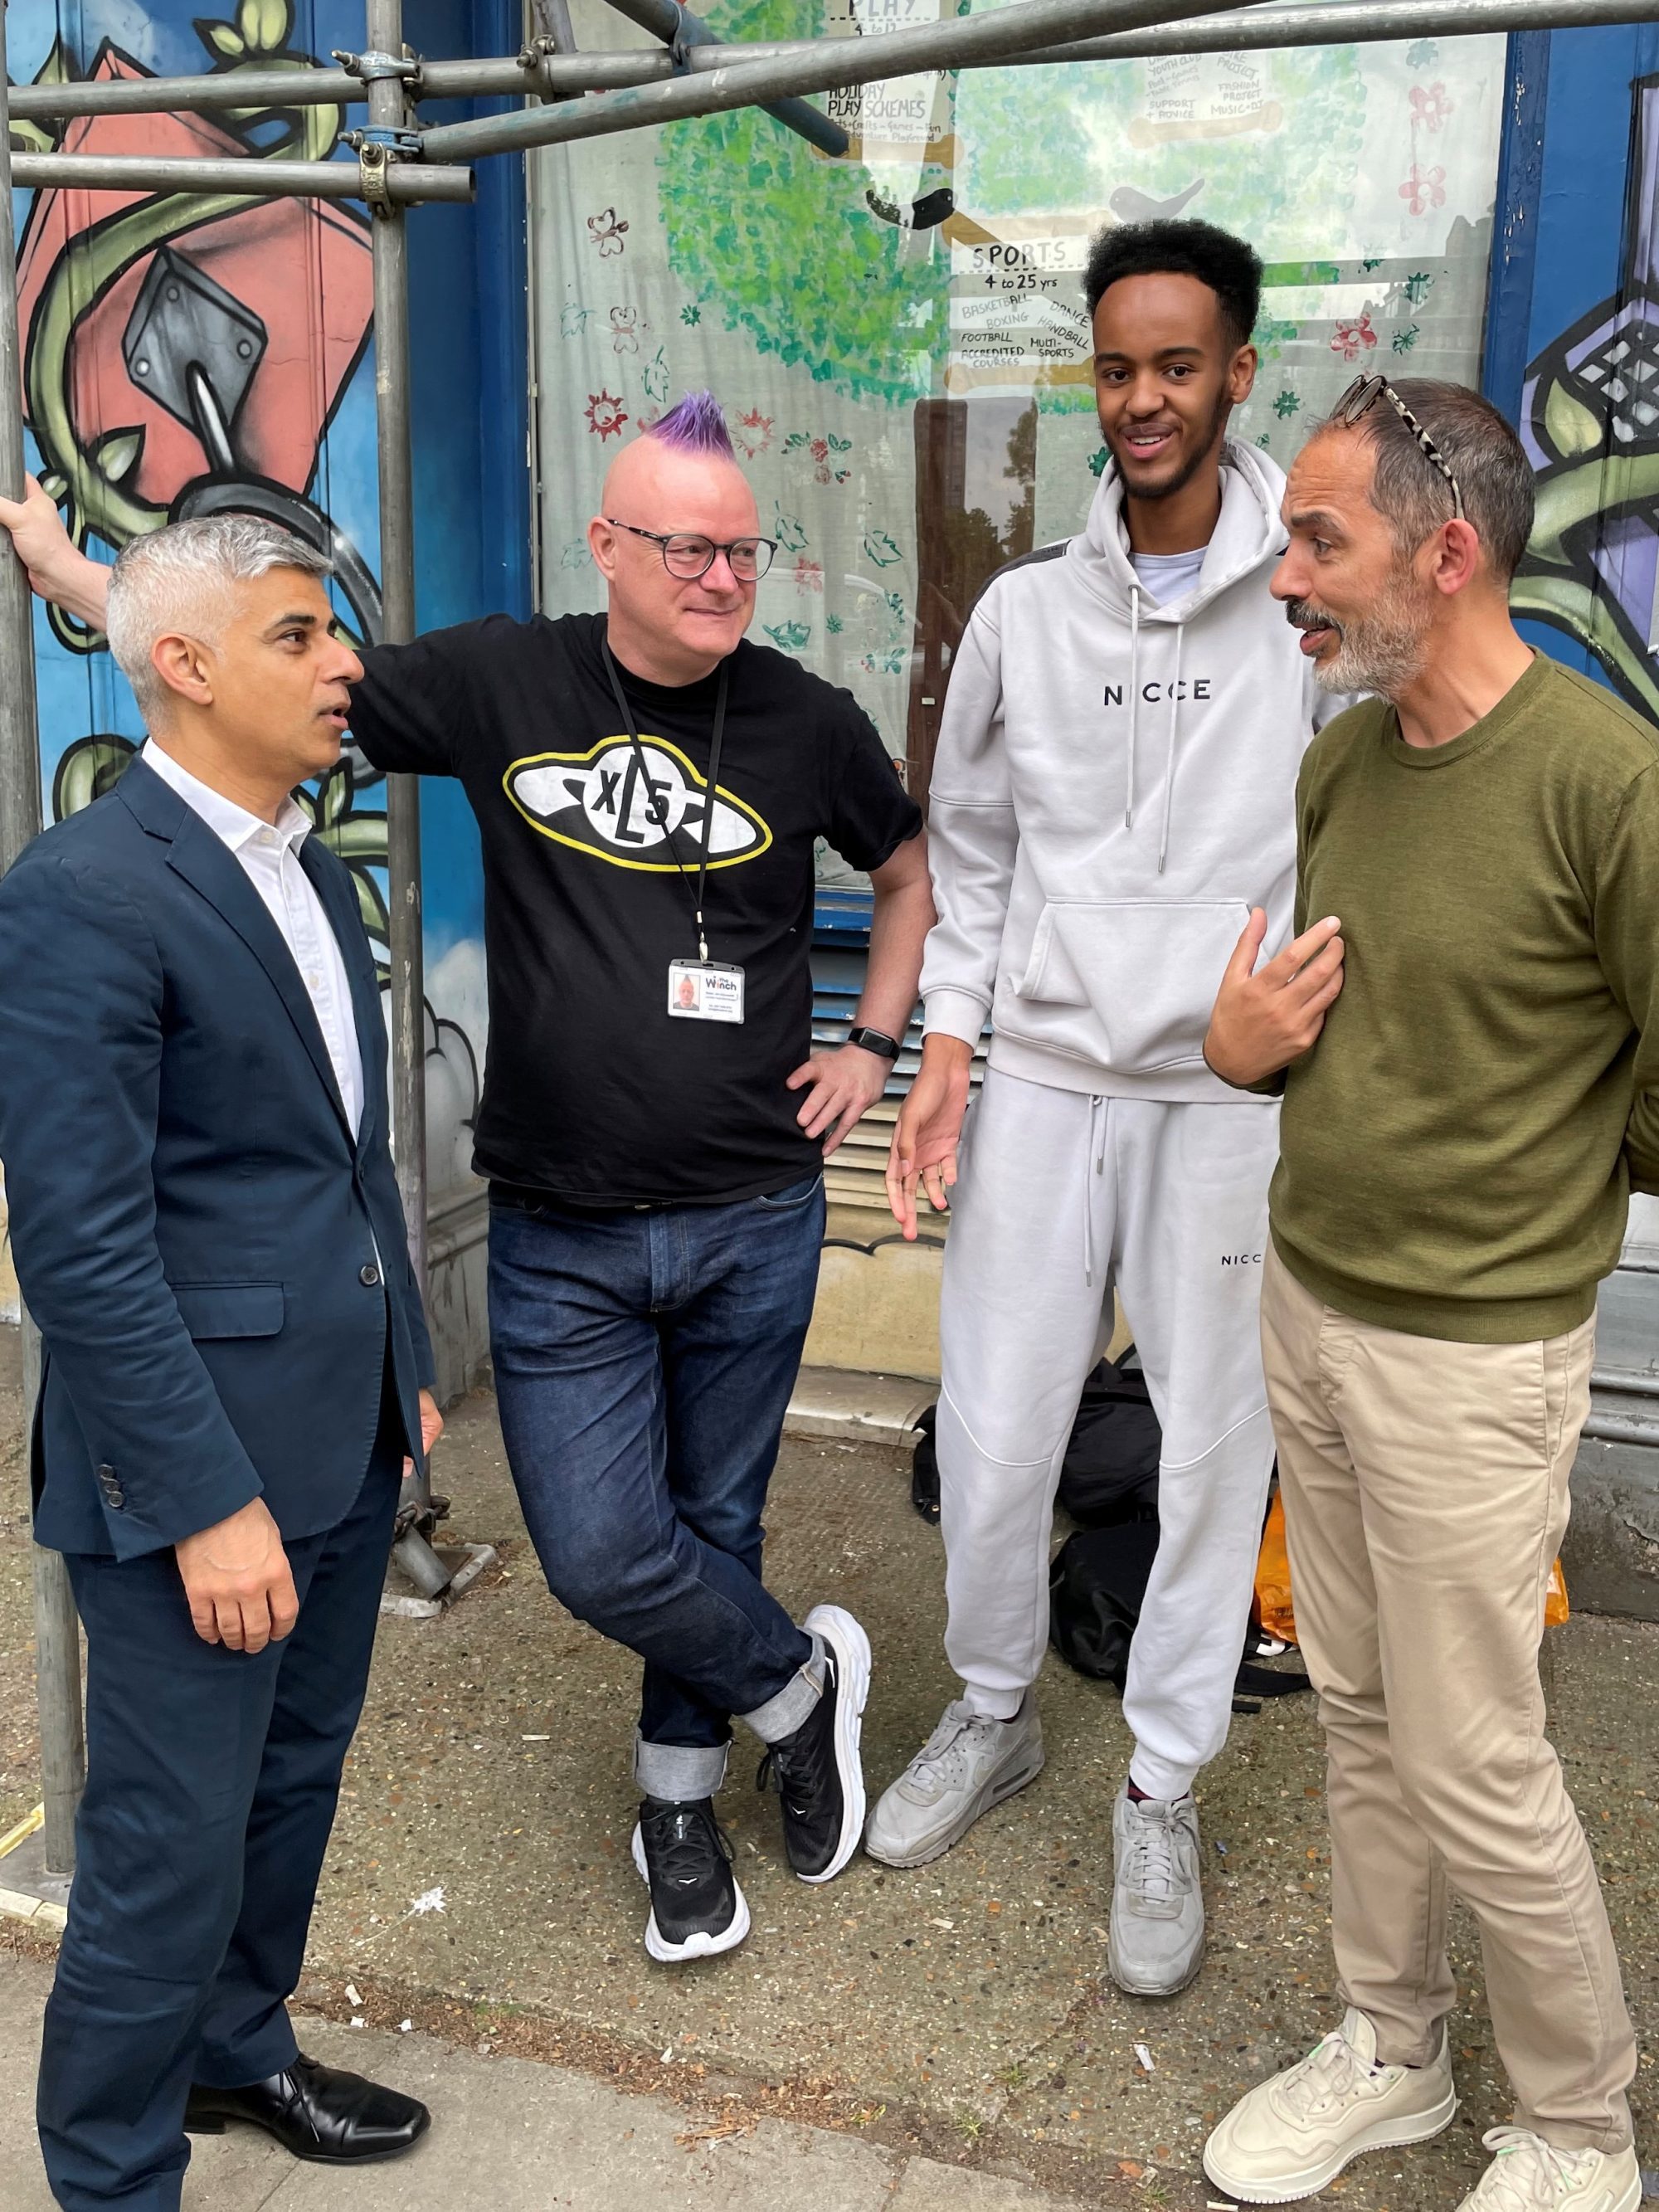 london mayor, meets three people of different backgrounds